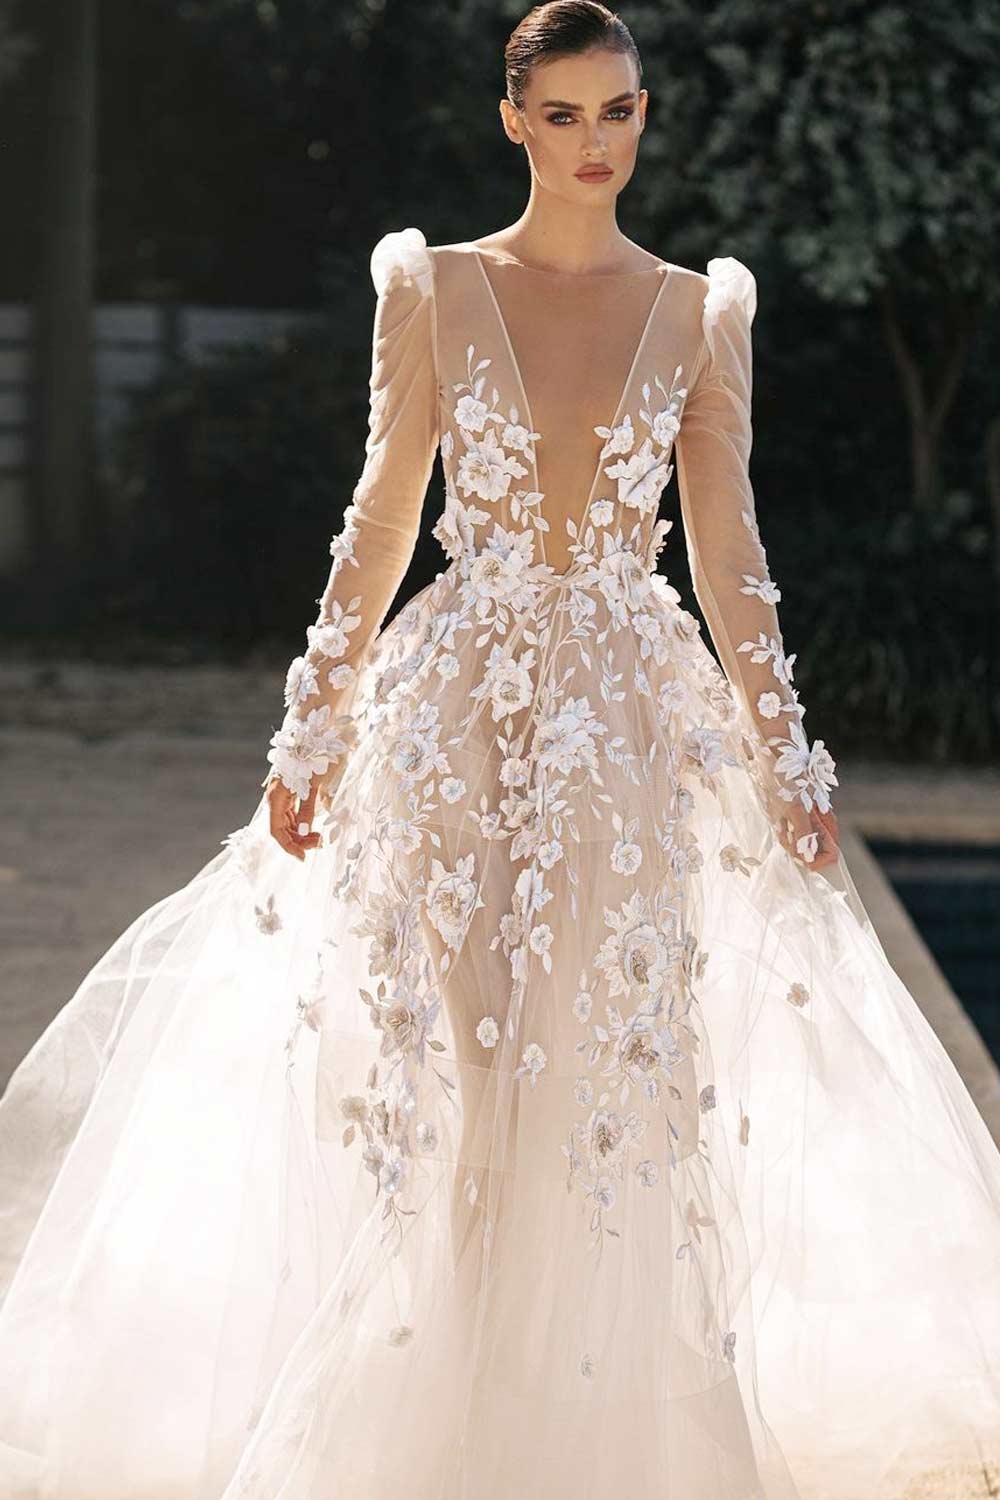 Are Long Sleeve Wedding Dresses in Trend?